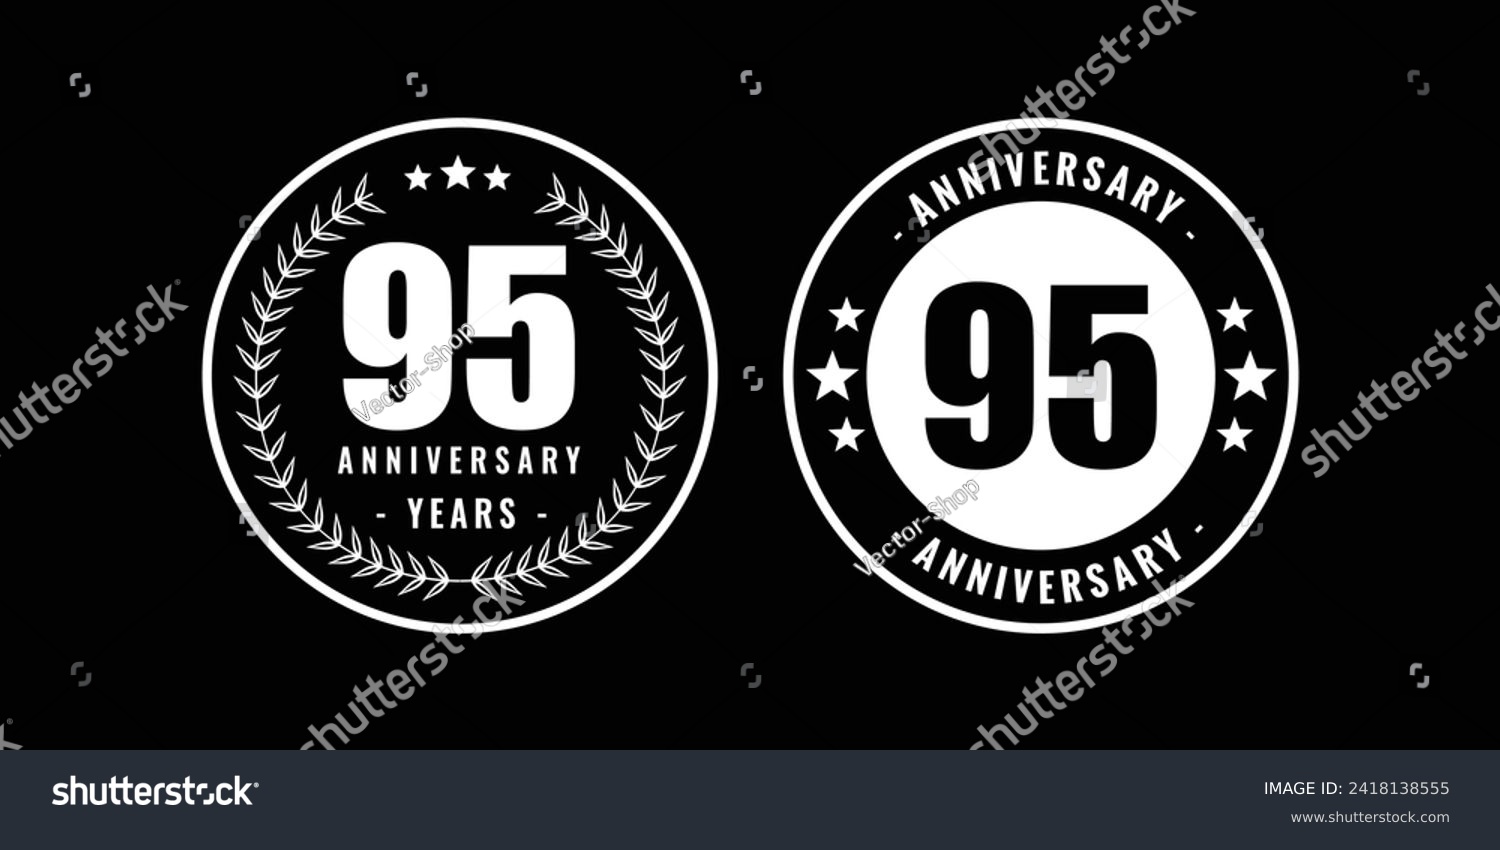 SVG of Anniversary icon or logo in black and white. 95TH Anniversary logo template illustration. svg